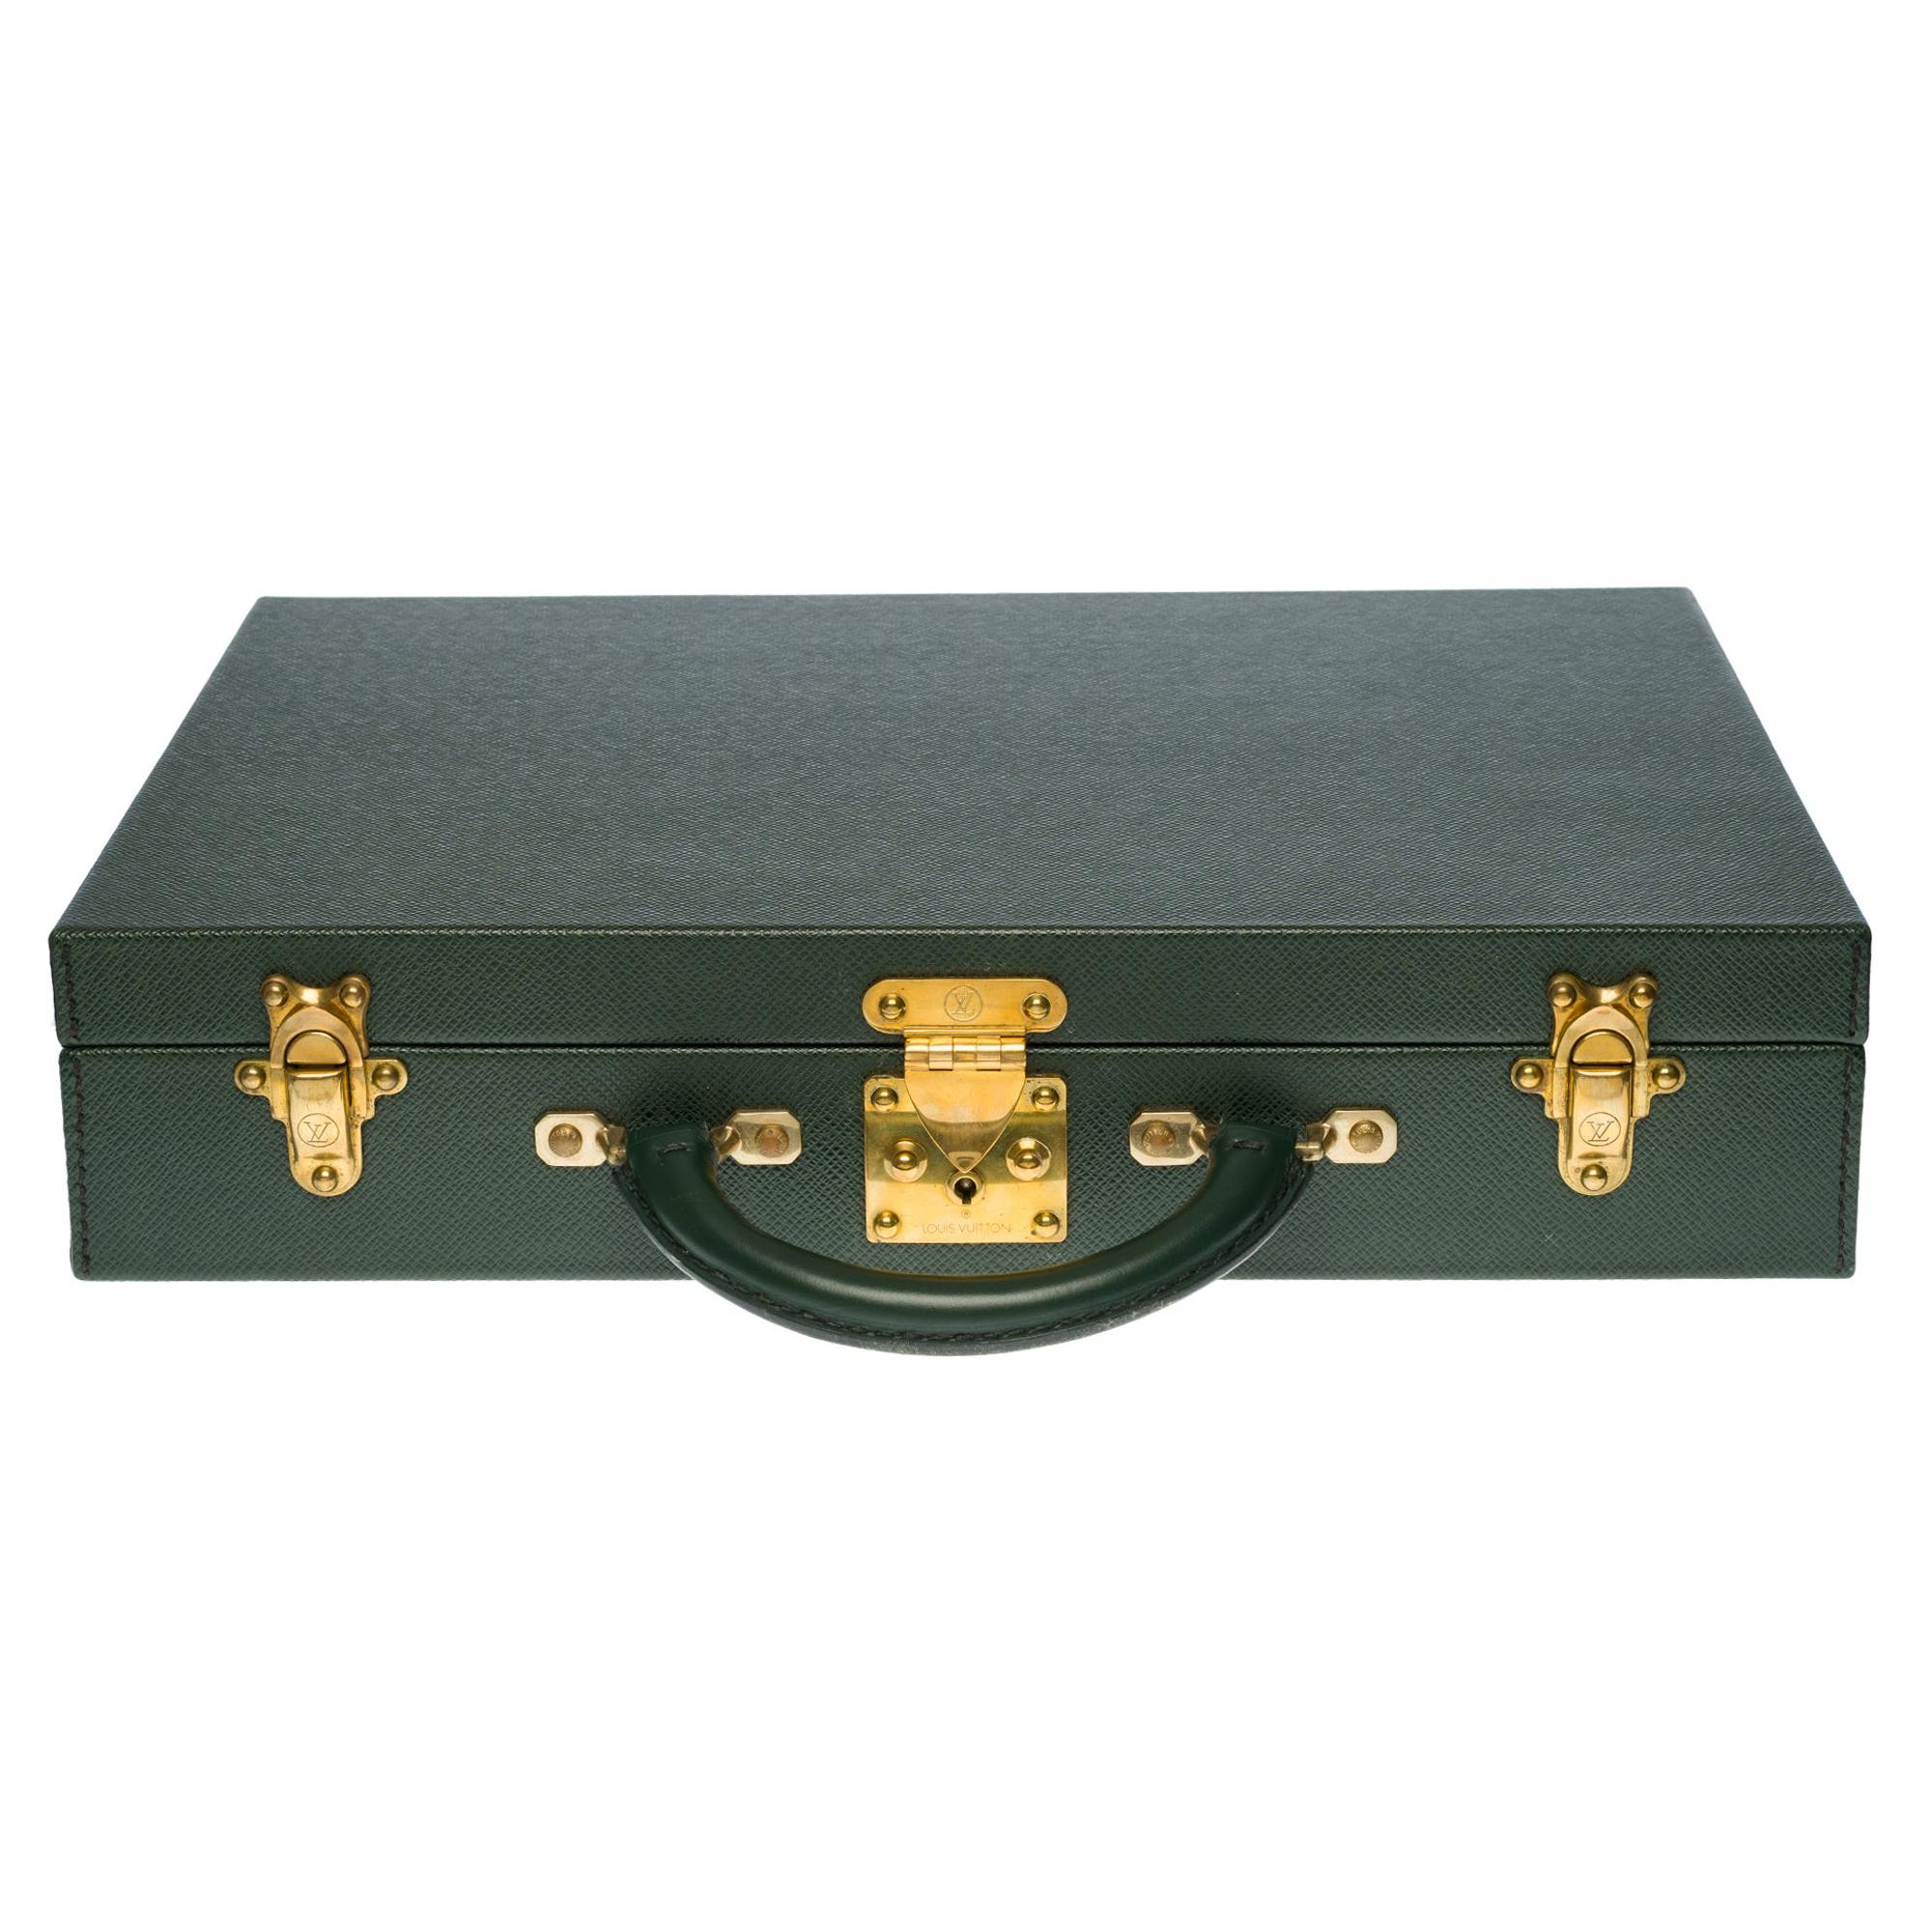 Louis Vuitton "President" Attaché Case in green Taïga leather and gold hardware